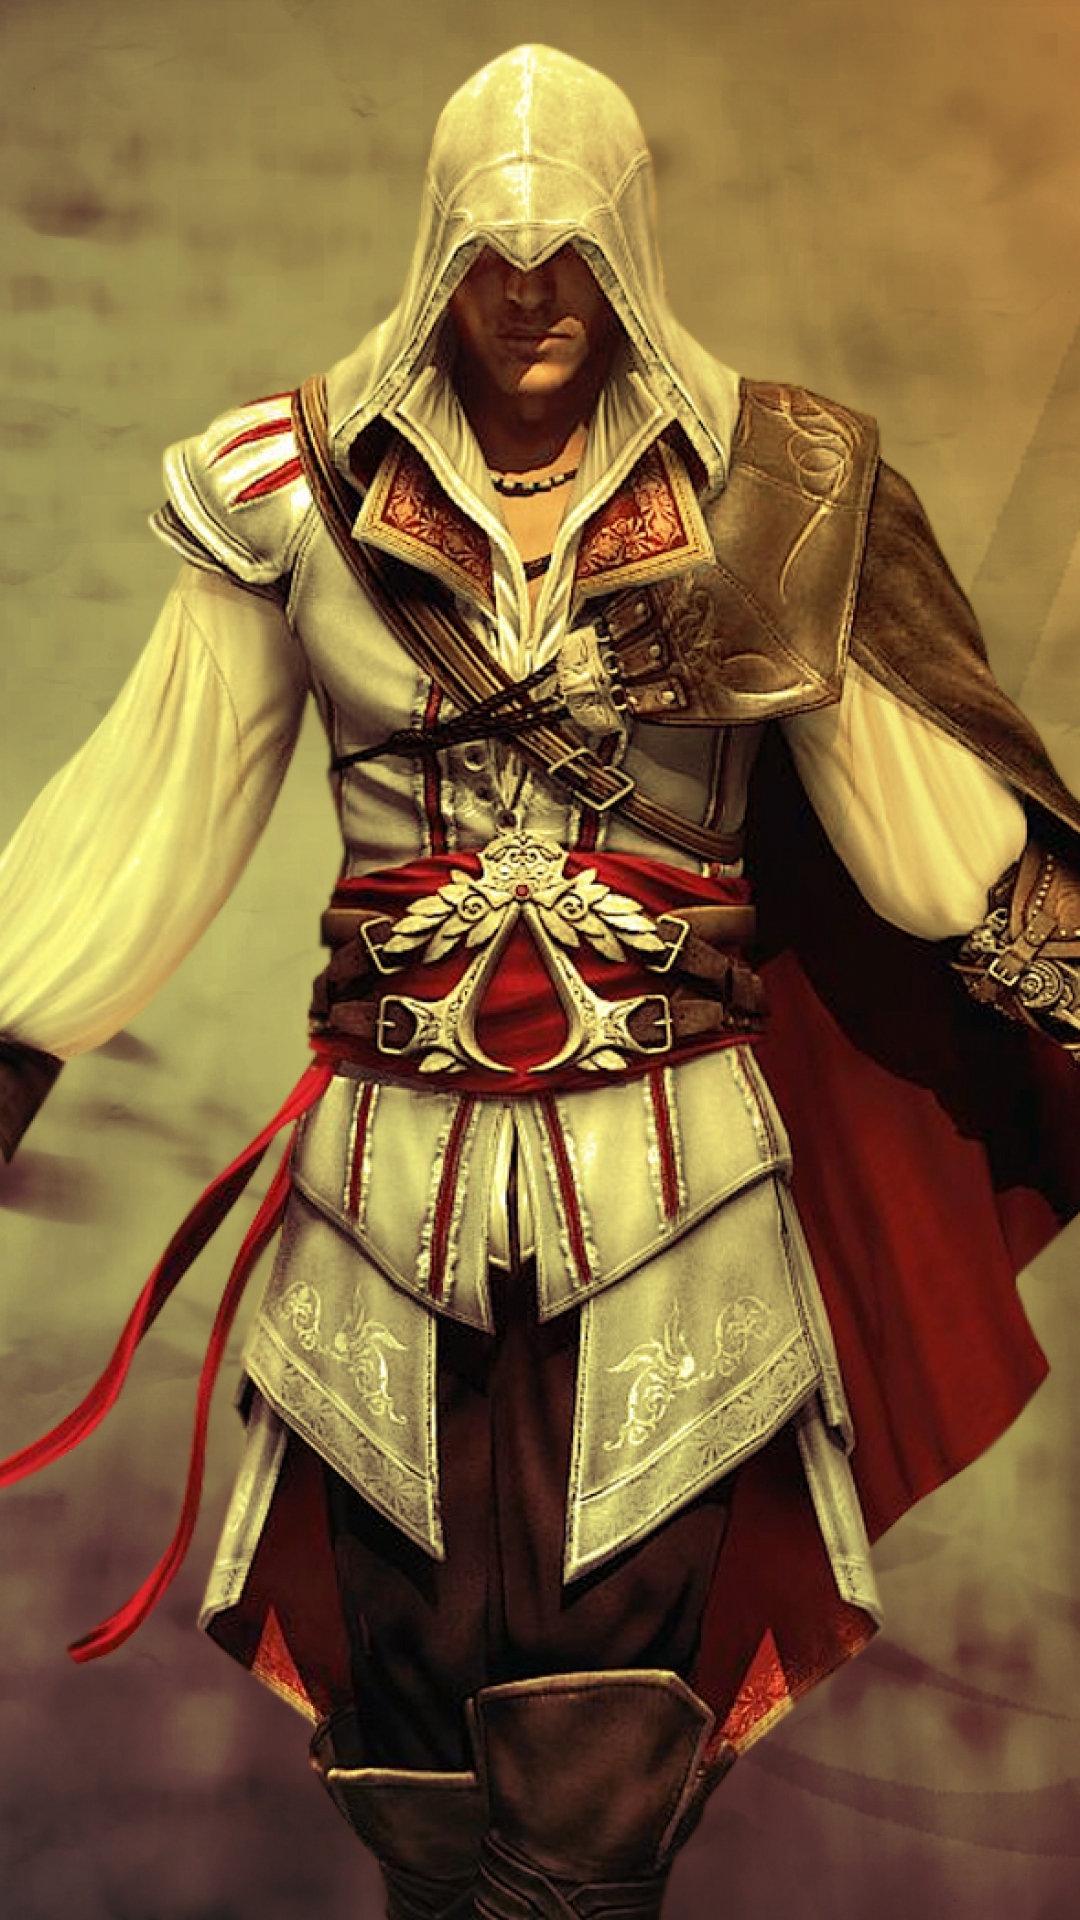 Assassin S Creed Hd Wallpaper For Iphone - Assassins Creed Wallpaper Hd  Android - 1080x1920 Wallpaper 